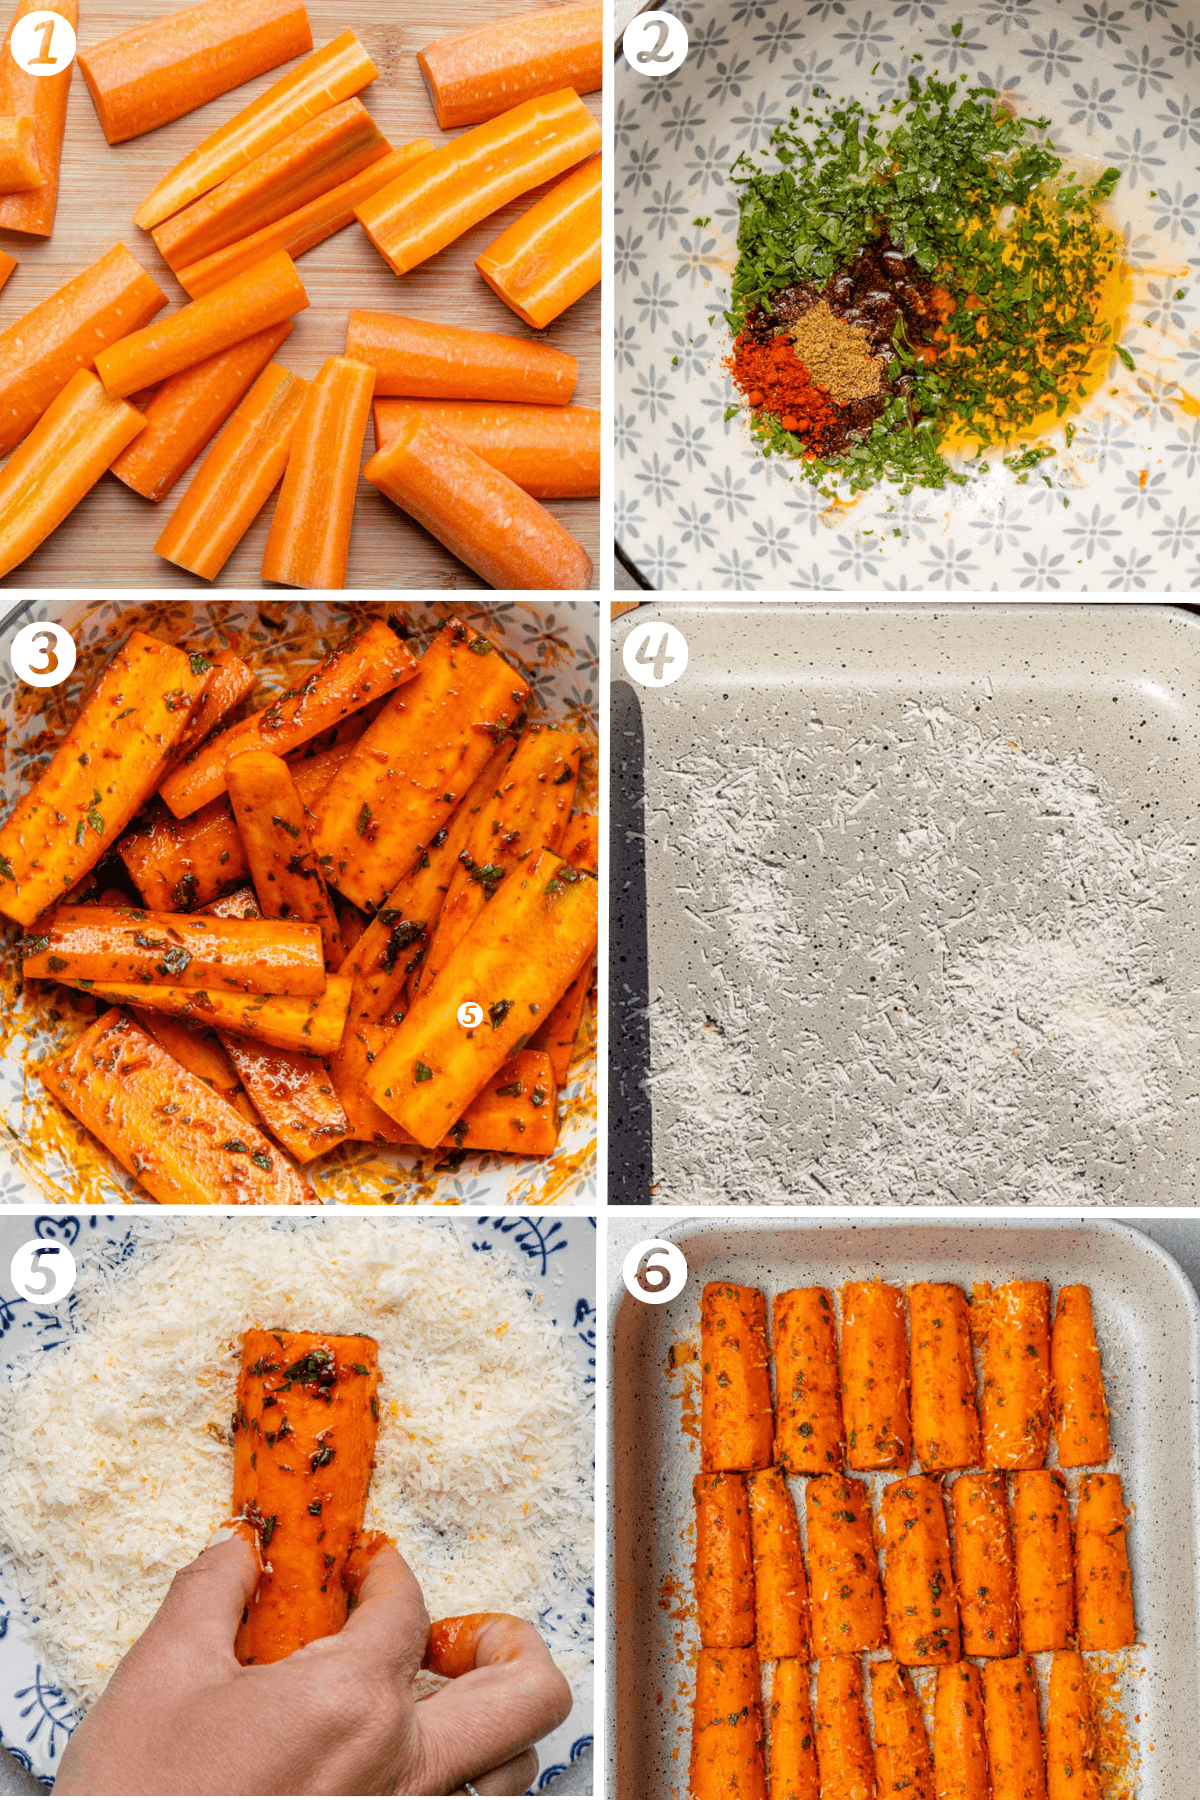 Steps on how to make parmesan crusted carrots